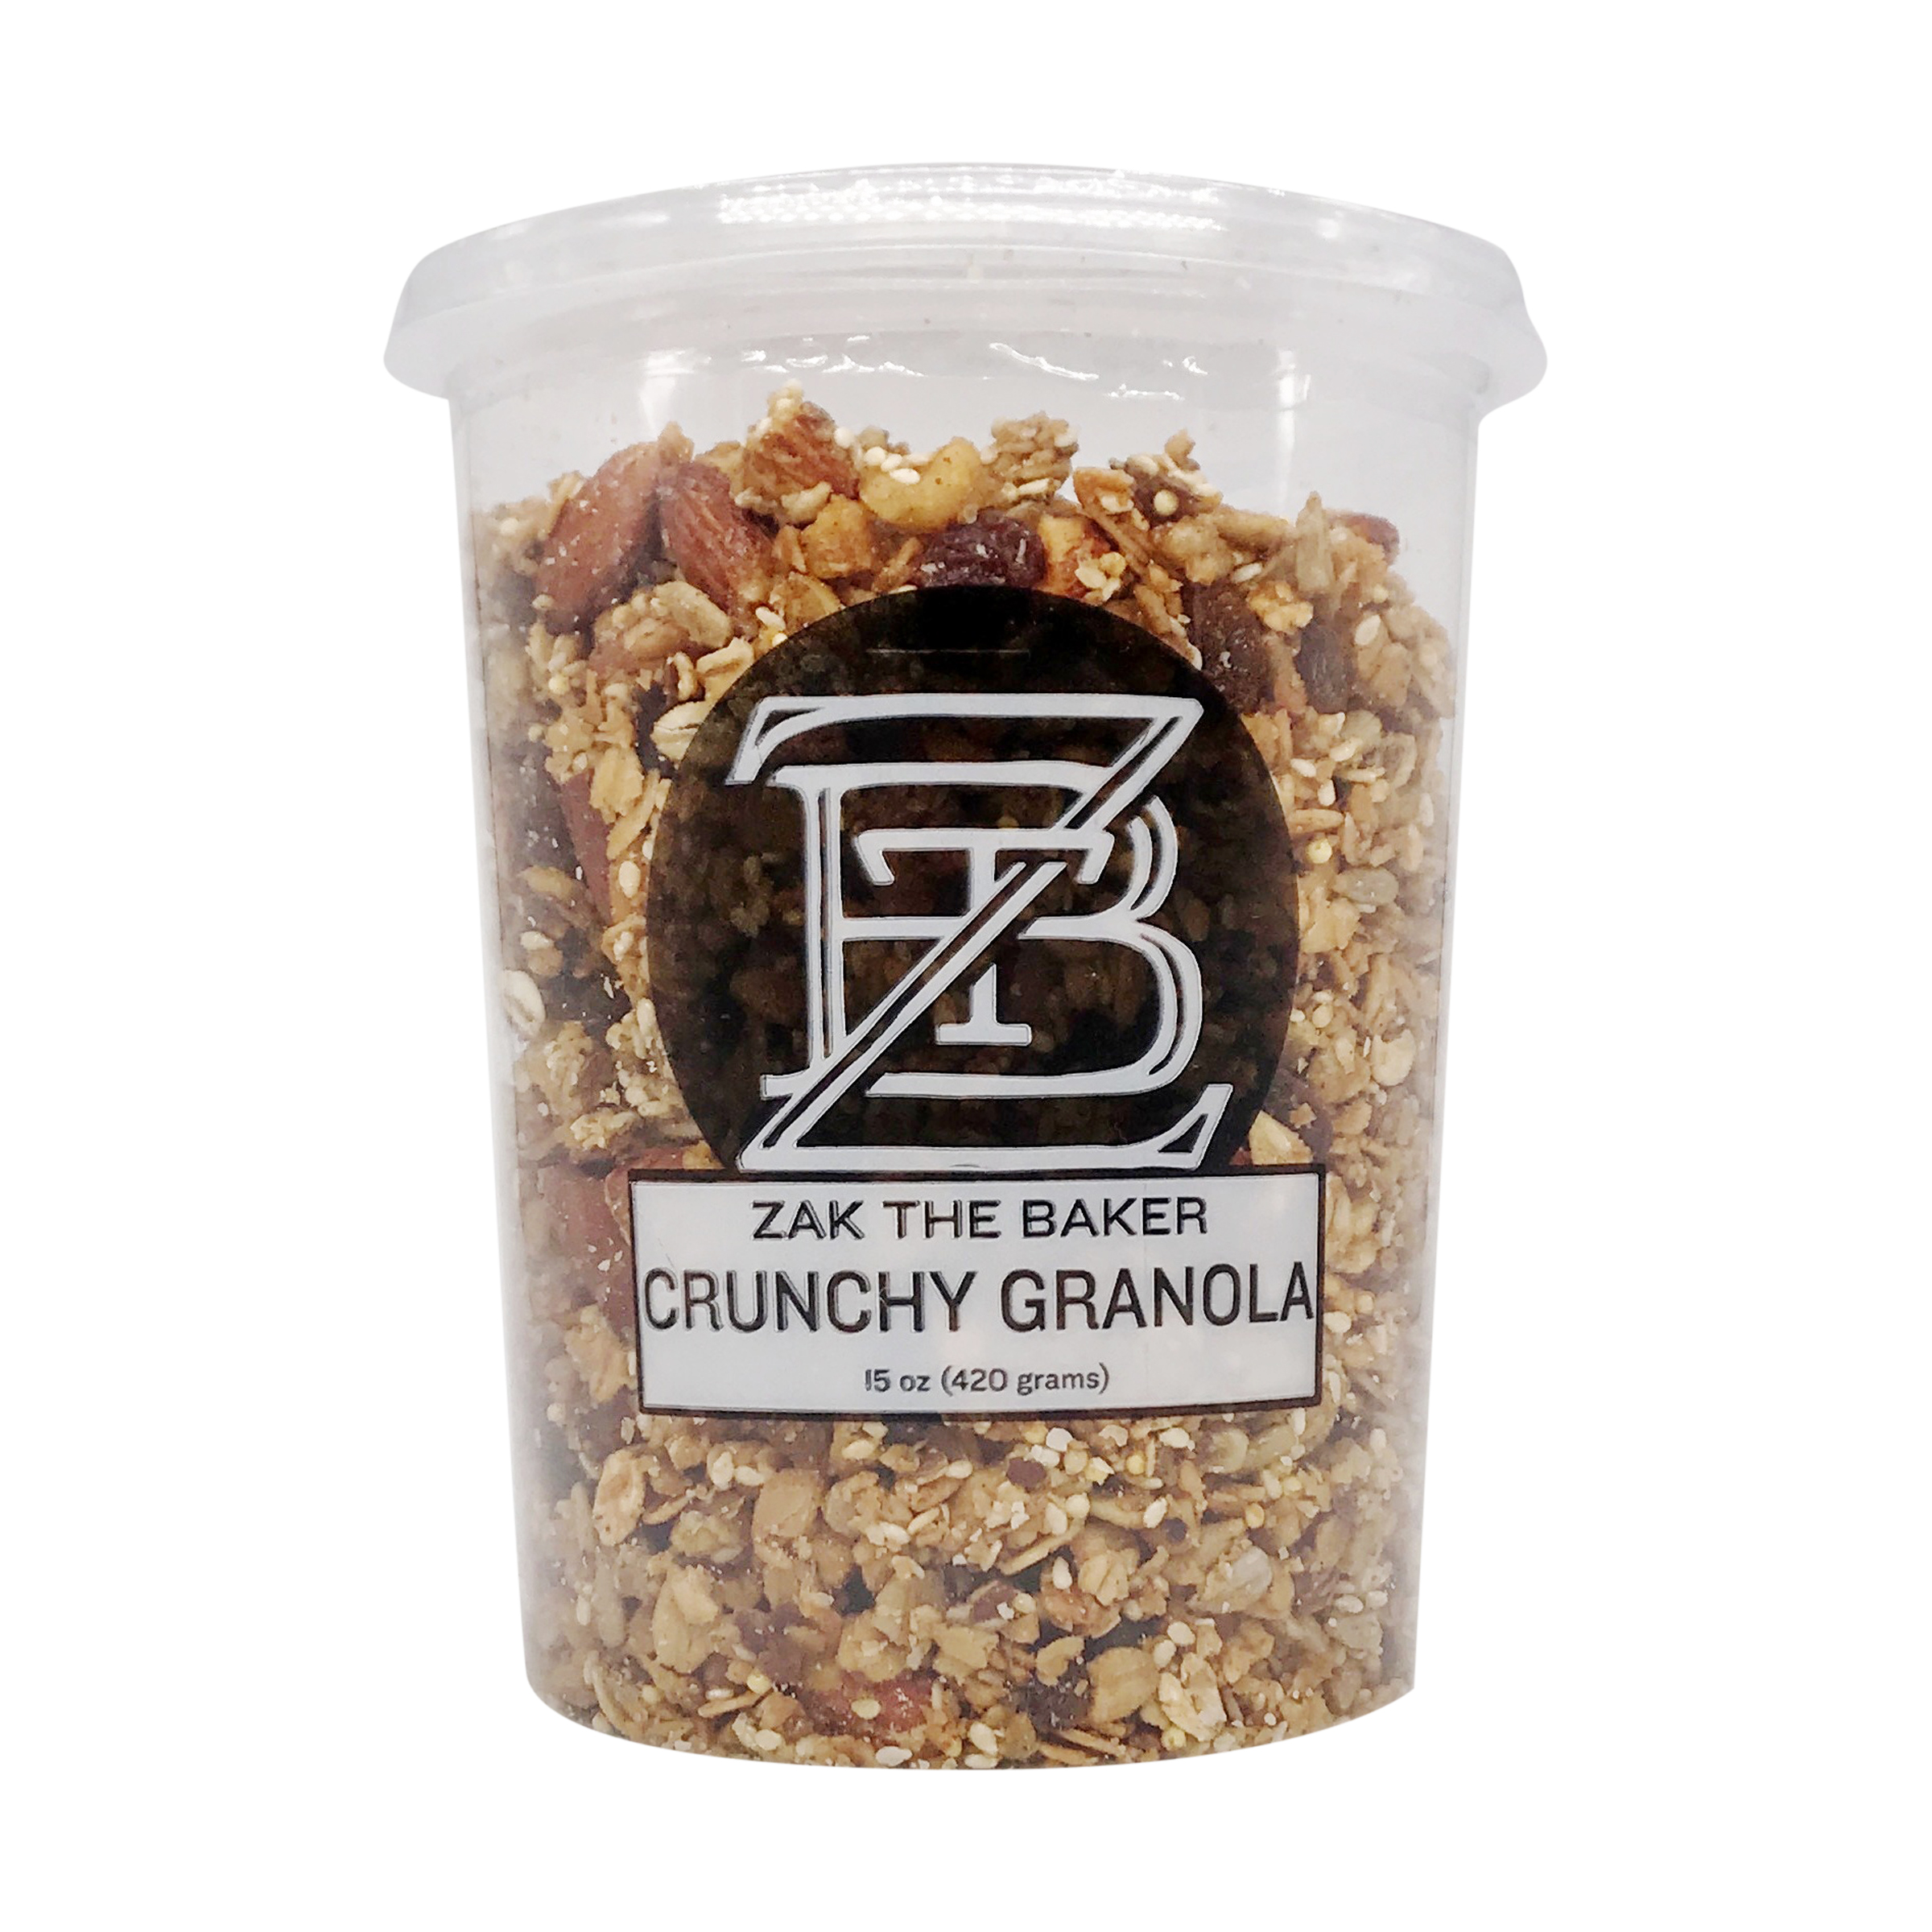 Granola Nutrition Facts Whole Foods | Besto Blog